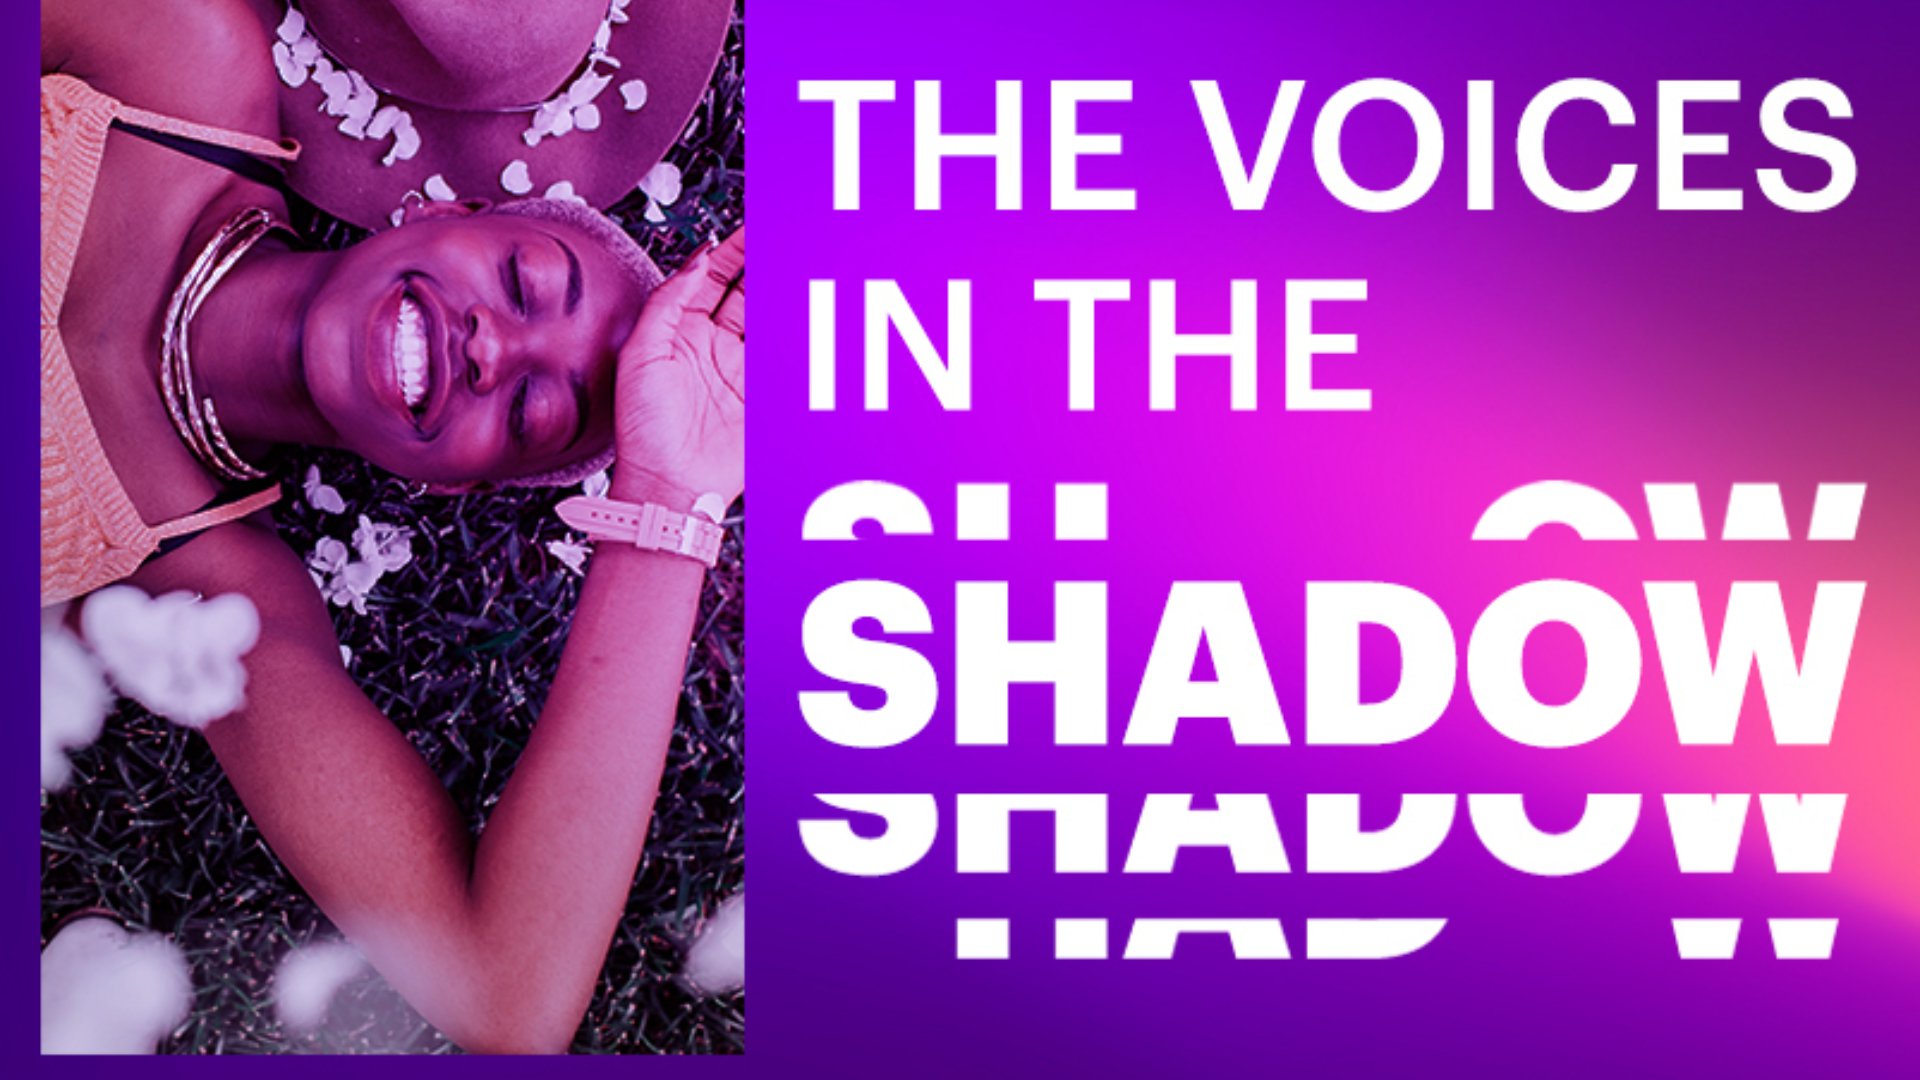 The voice in the shadow